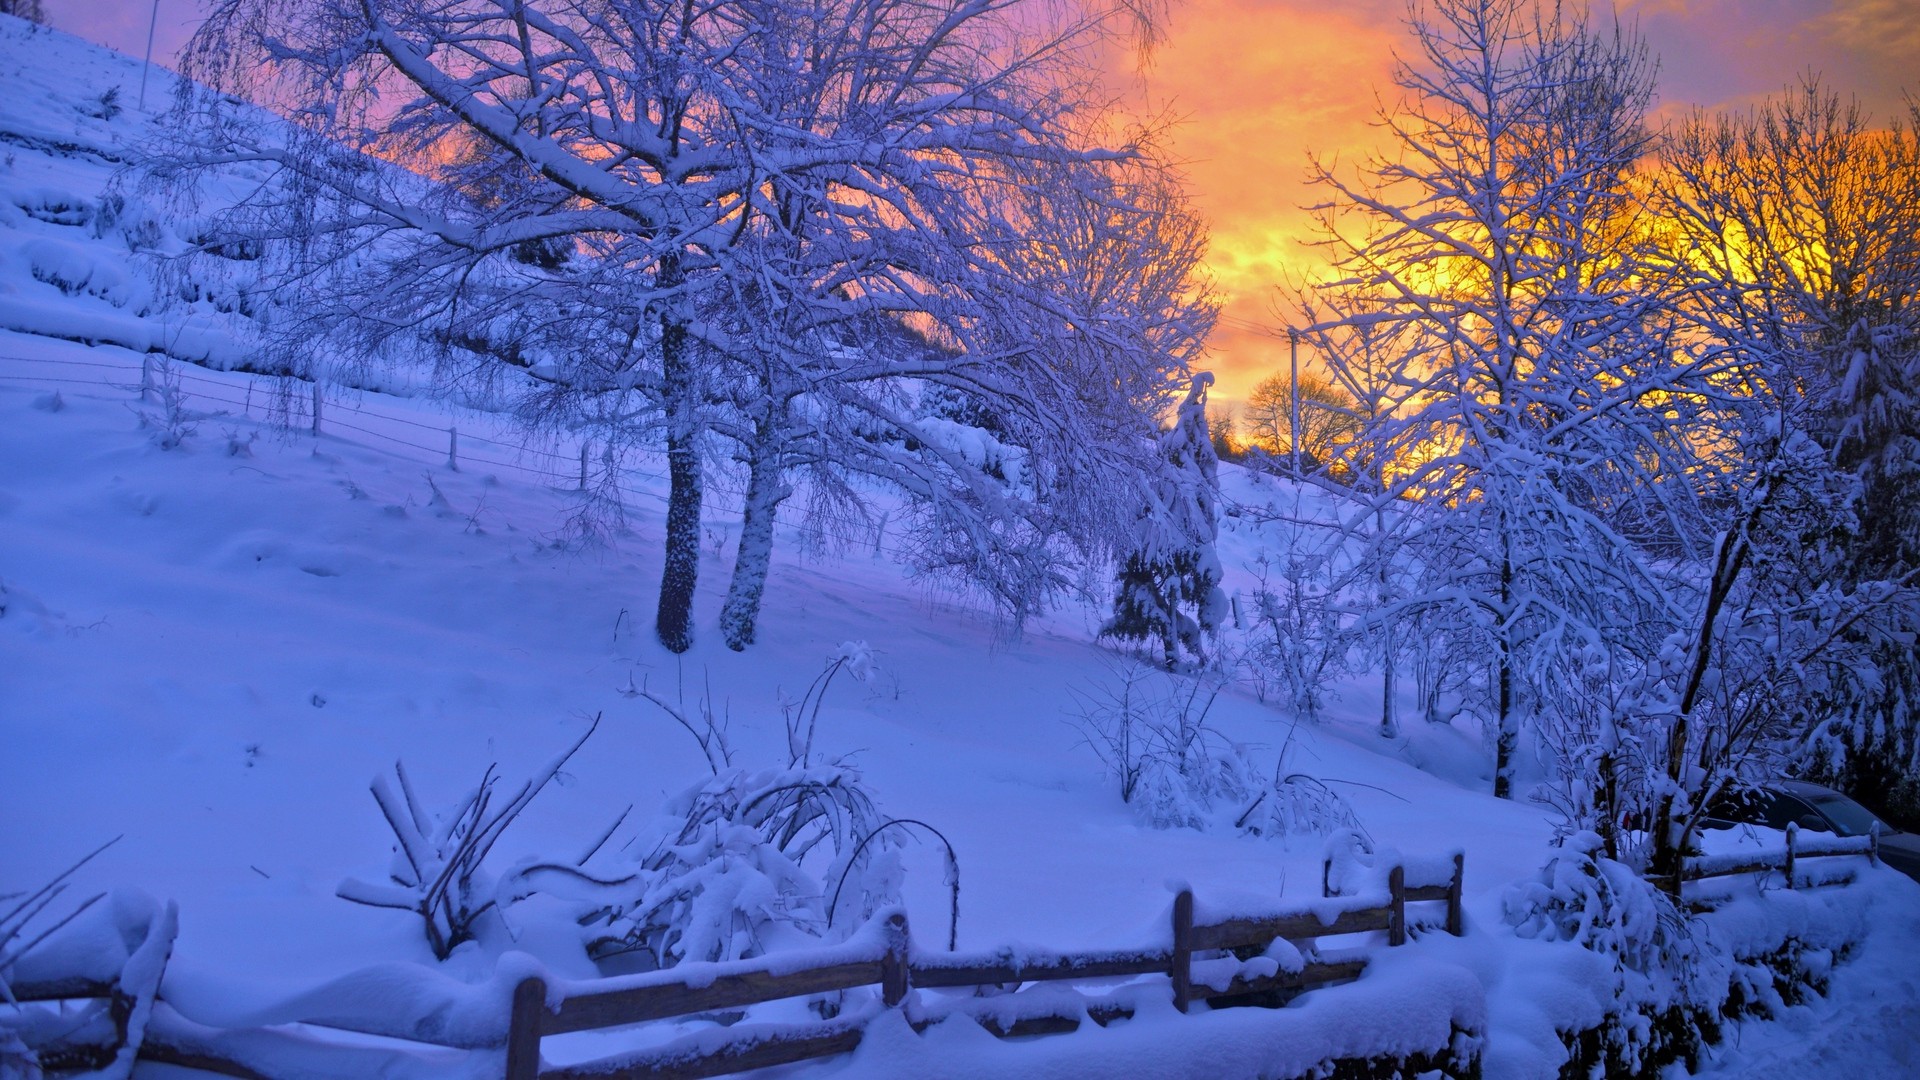 1920x1080 wallpapers: winter, snow, sunset, fence, trees (image)